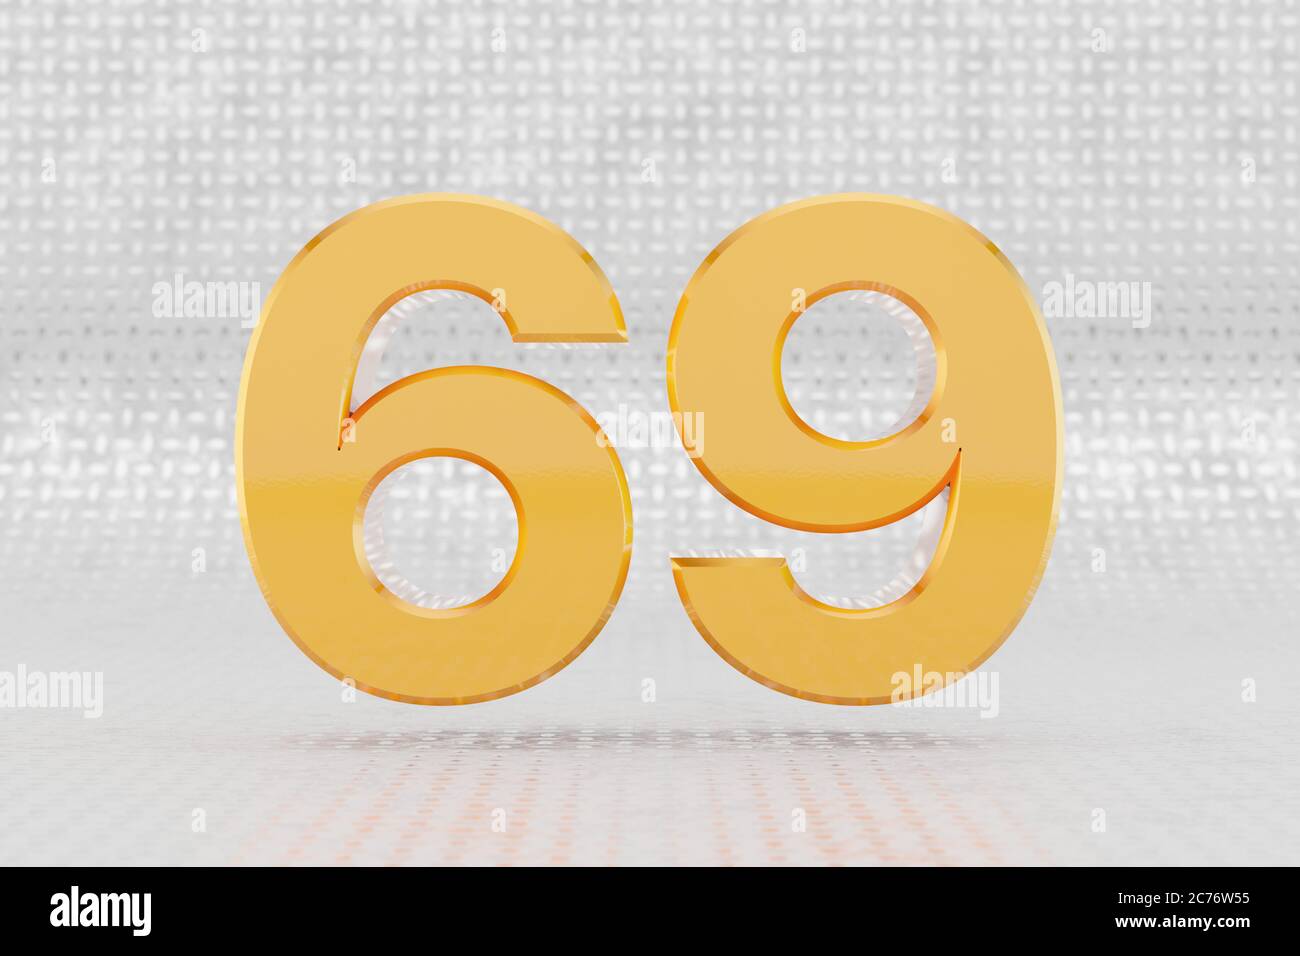 69 Unique Number White Color Isolated Stock Illustration 2287820915   Shutterstock